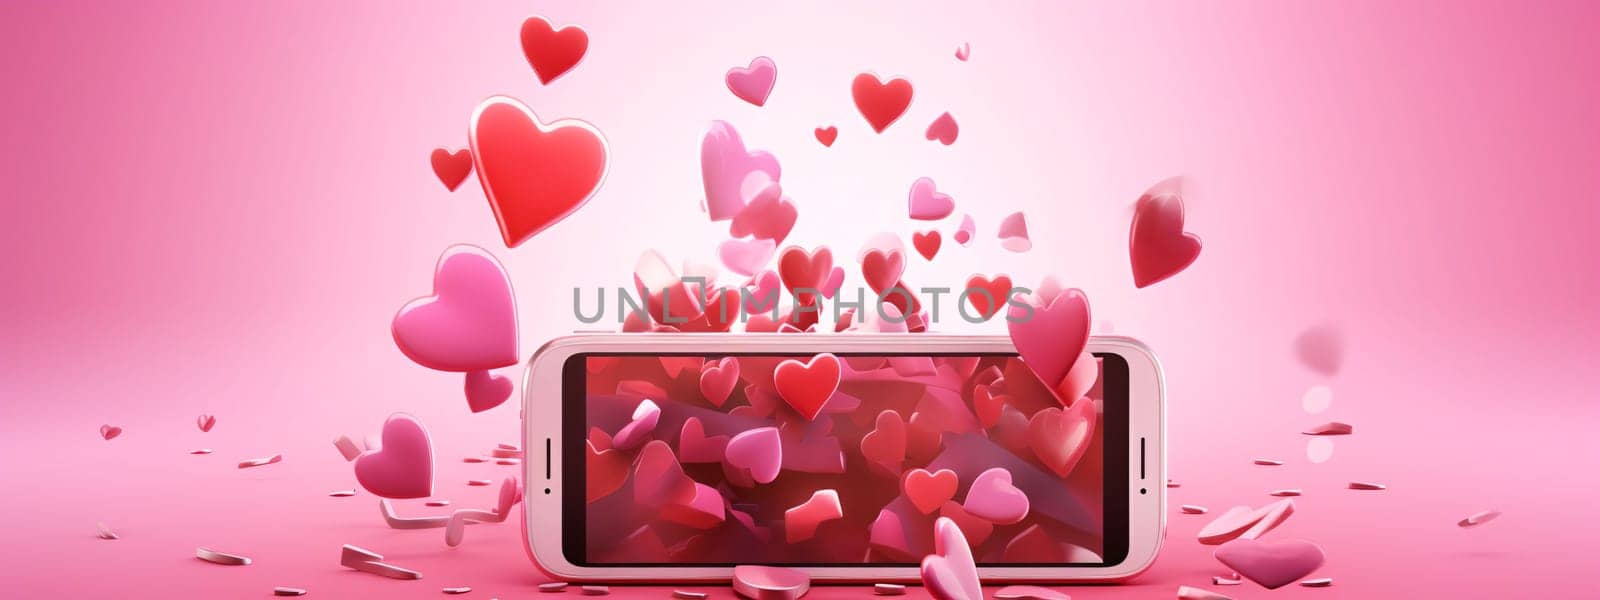 Smartphone screen: Smartphone with flying hearts on pink background. 3D rendering.